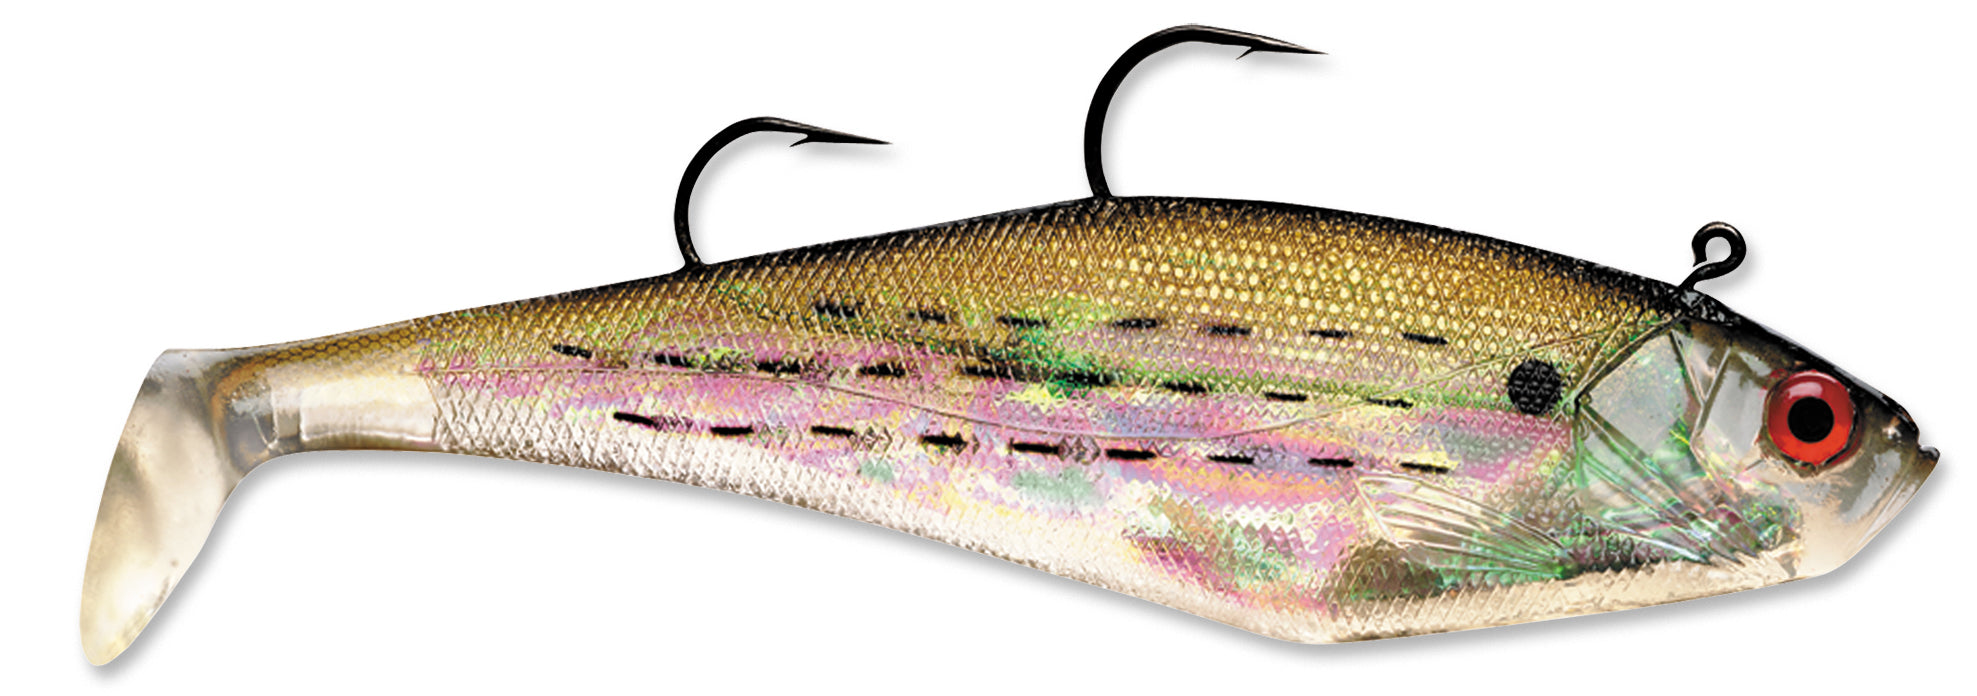 9 Shad Peddle Tail Swimbait - 3 pieces